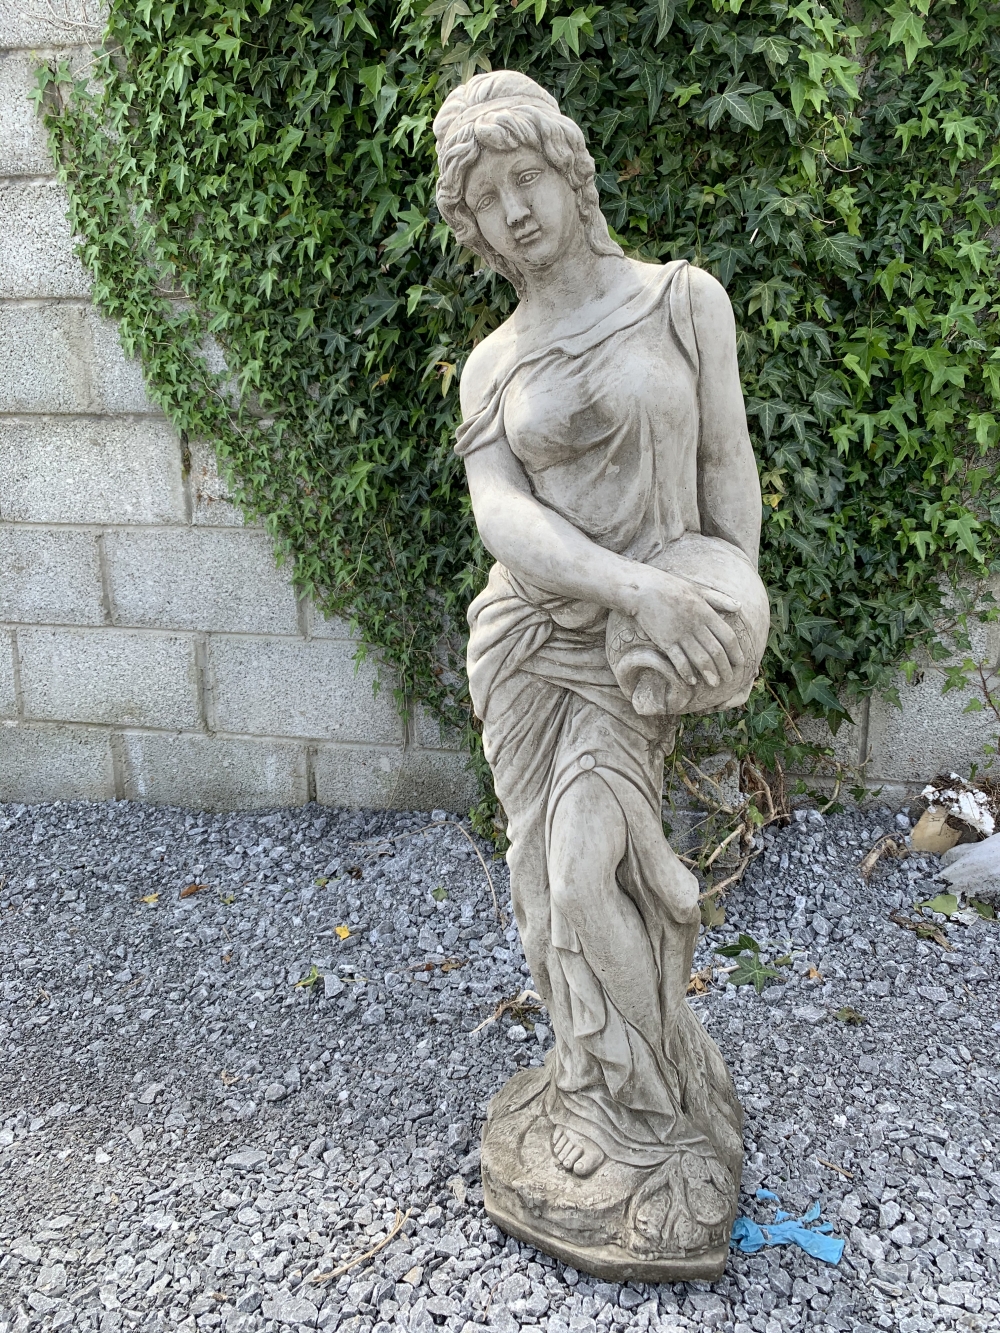 A STONE GARDEN ORNAMENT IN THE FORM OF A FEMALE FIGURE, holding an urn, size: 4ft tall approx.